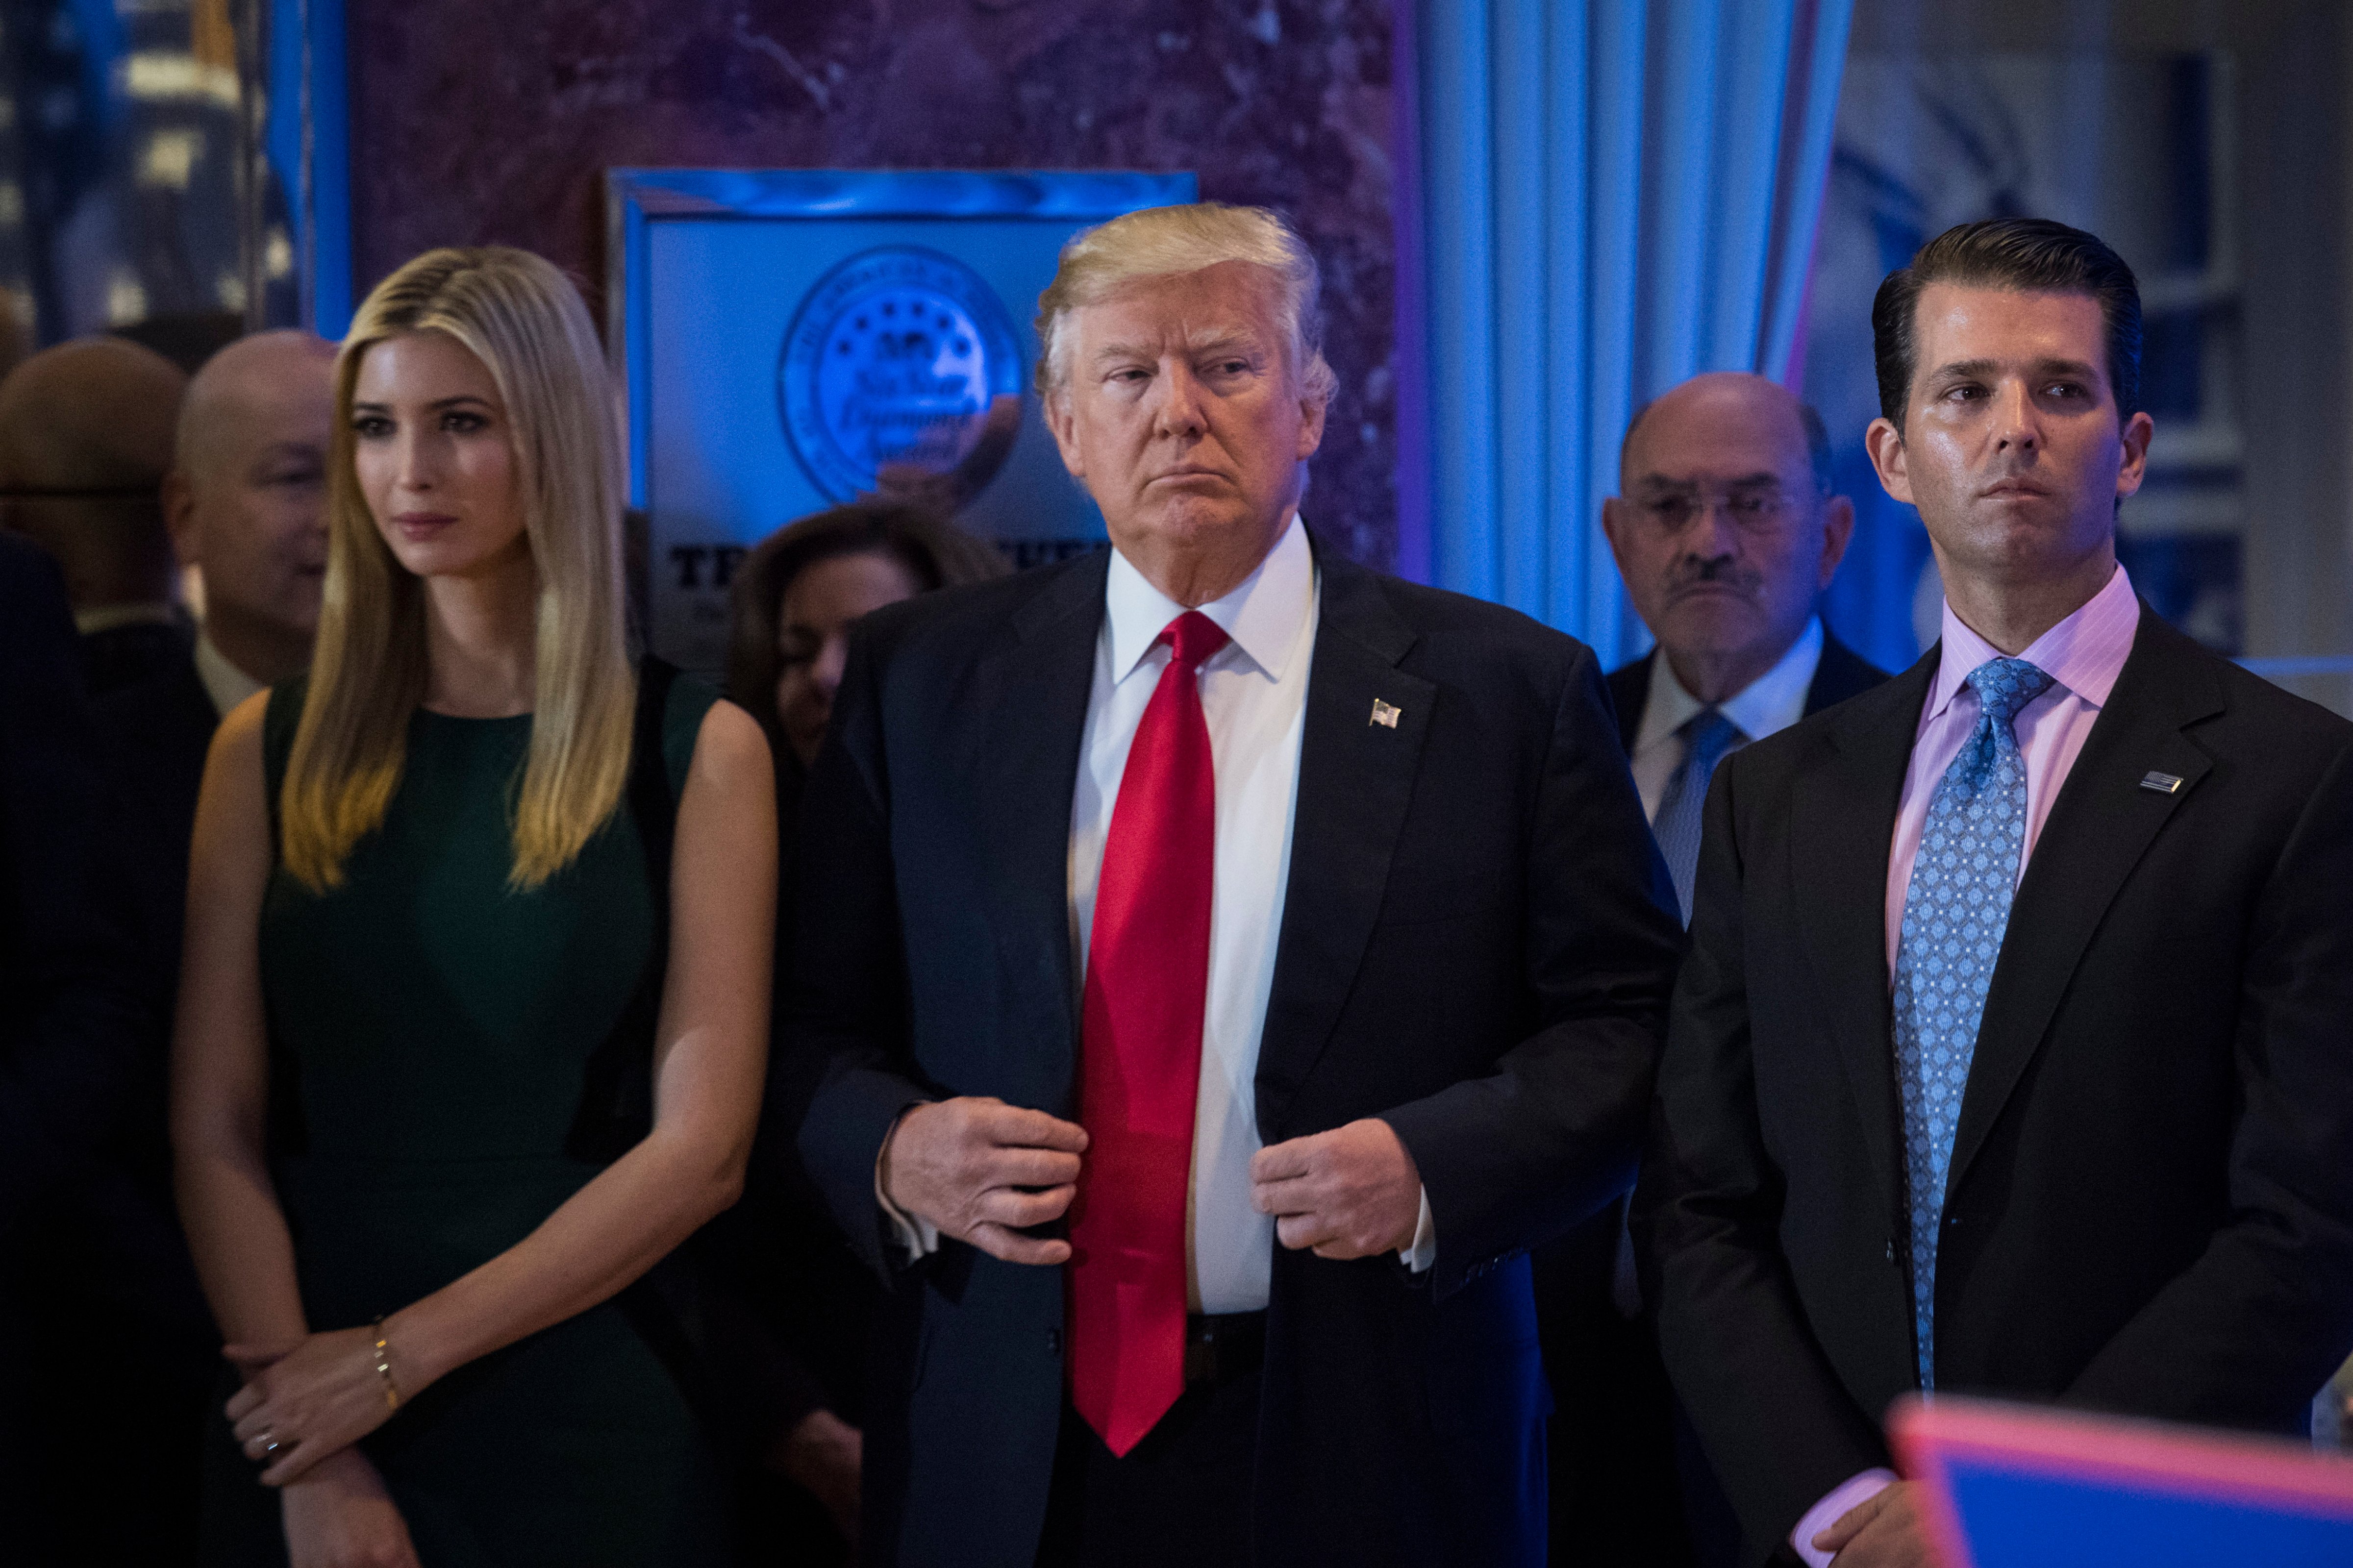 President-elect Donald Trump, Ivanka Trump, and Donald Trump Jr., listen during a press conference at Trump Tower in New York, NY on Wednesday, Jan. 11, 2017. (Jabin Botsford—The Washington Post/Getty Images)